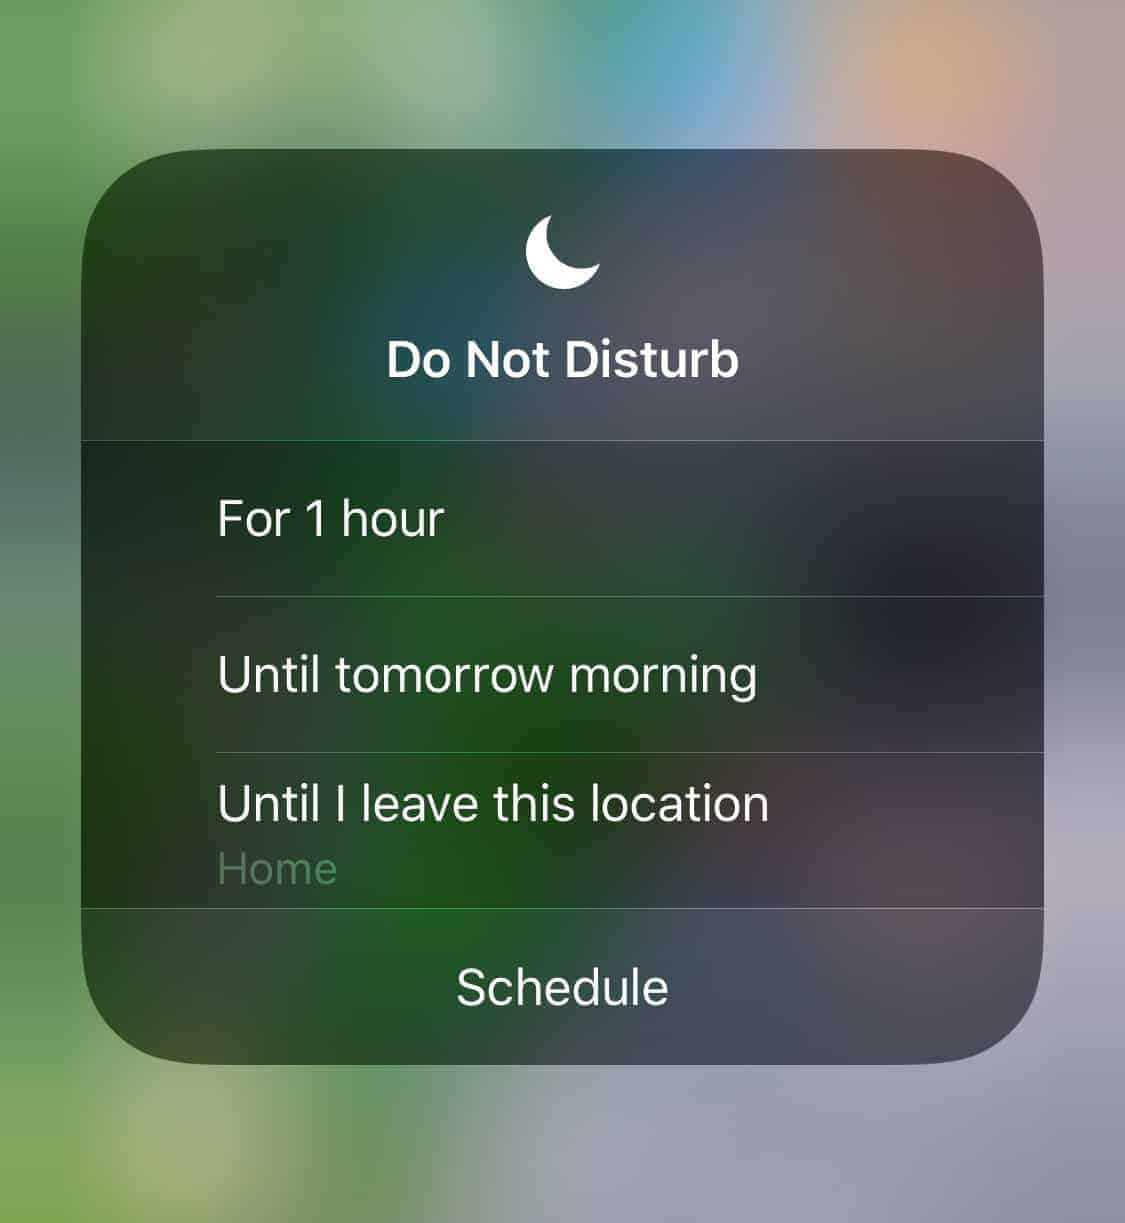 Whats new in "Do Not Disturb" on iOS 12